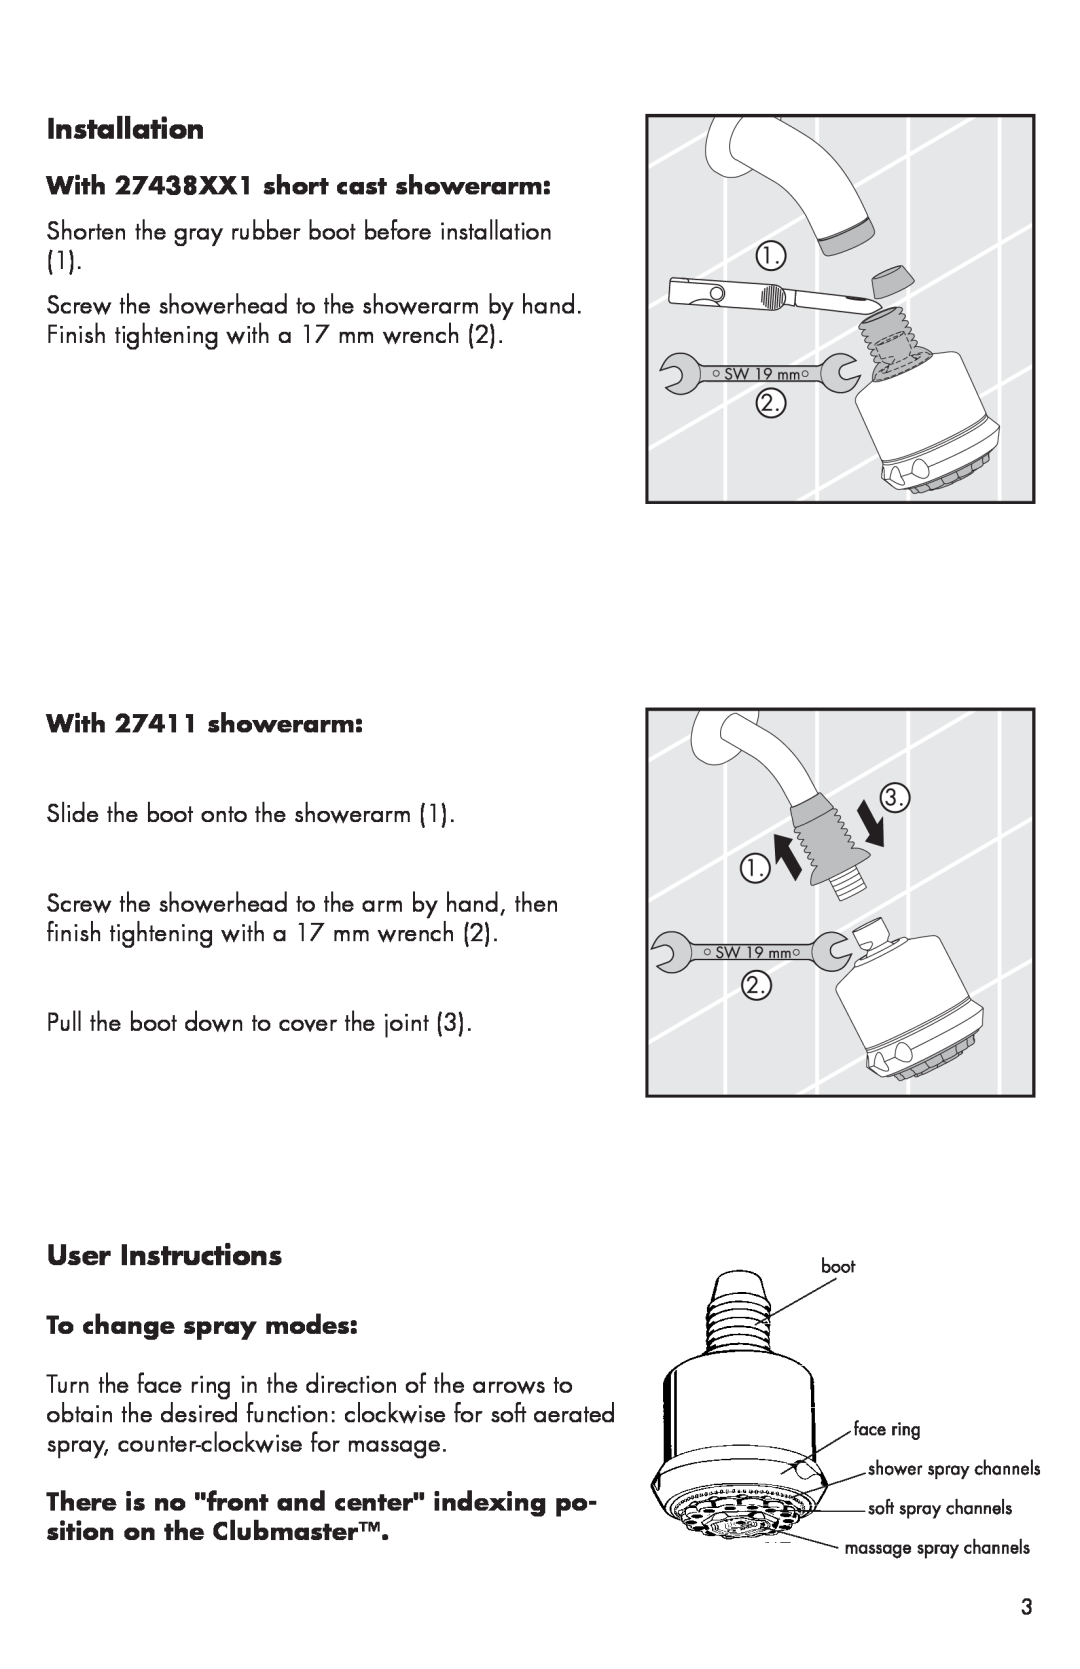 Axor 28496xx1 Installation, User Instructions, With 27438XX1 short cast showerarm, With 27411 showerarm 